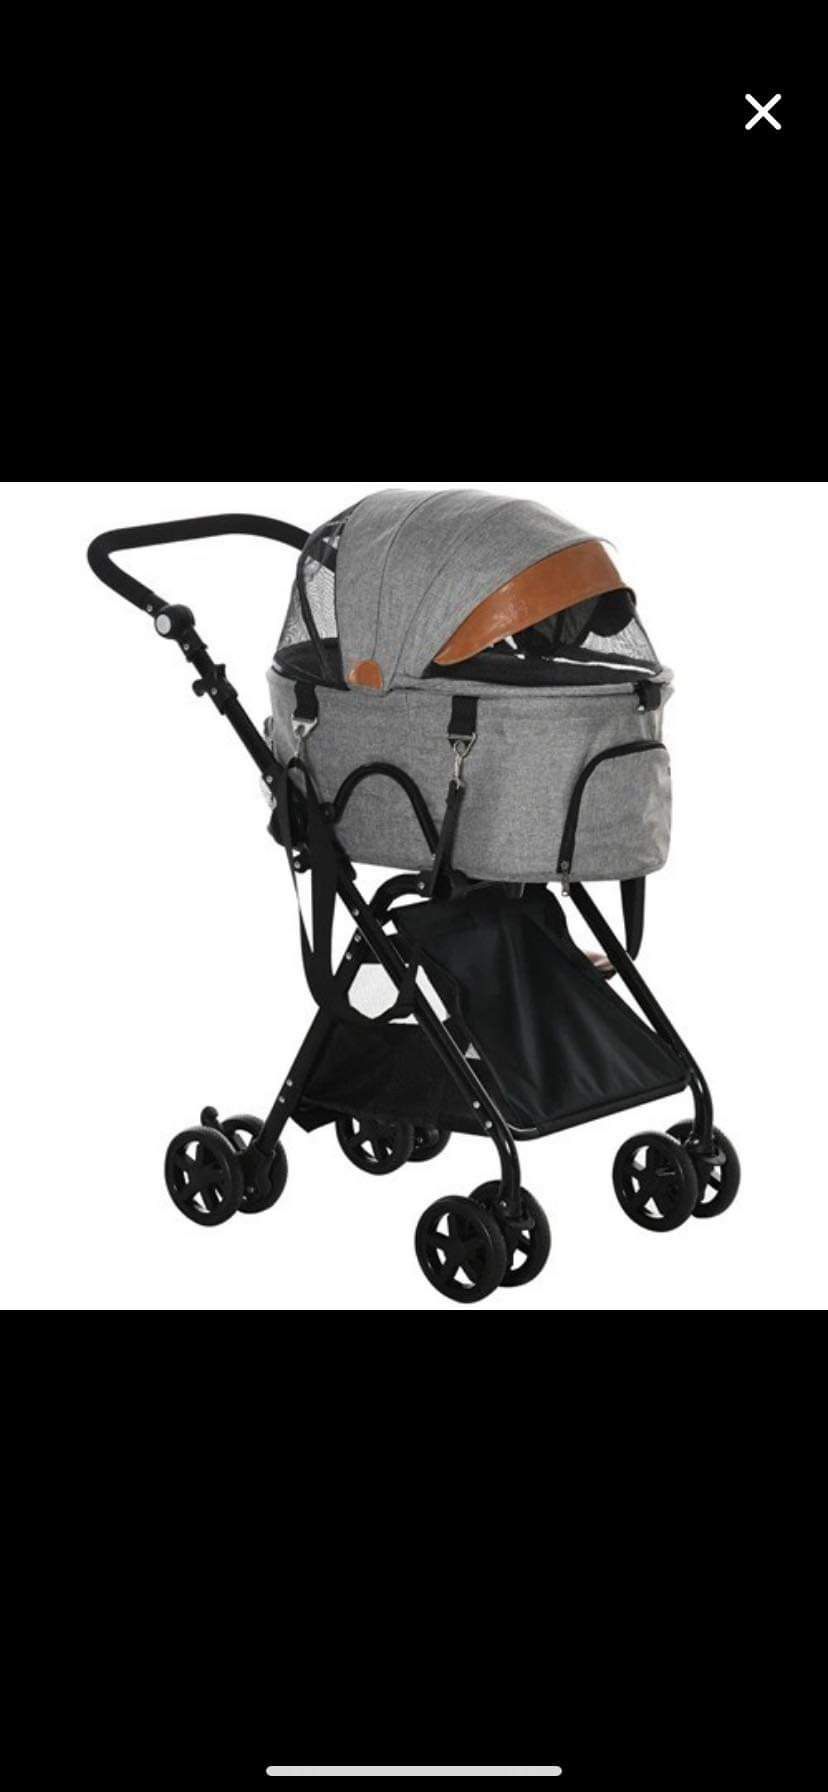 PawHut 2 in 1 Foldable Dog Stroller W/ Suspension, Detachable Carriage Safety Leashes & Basket NEW $